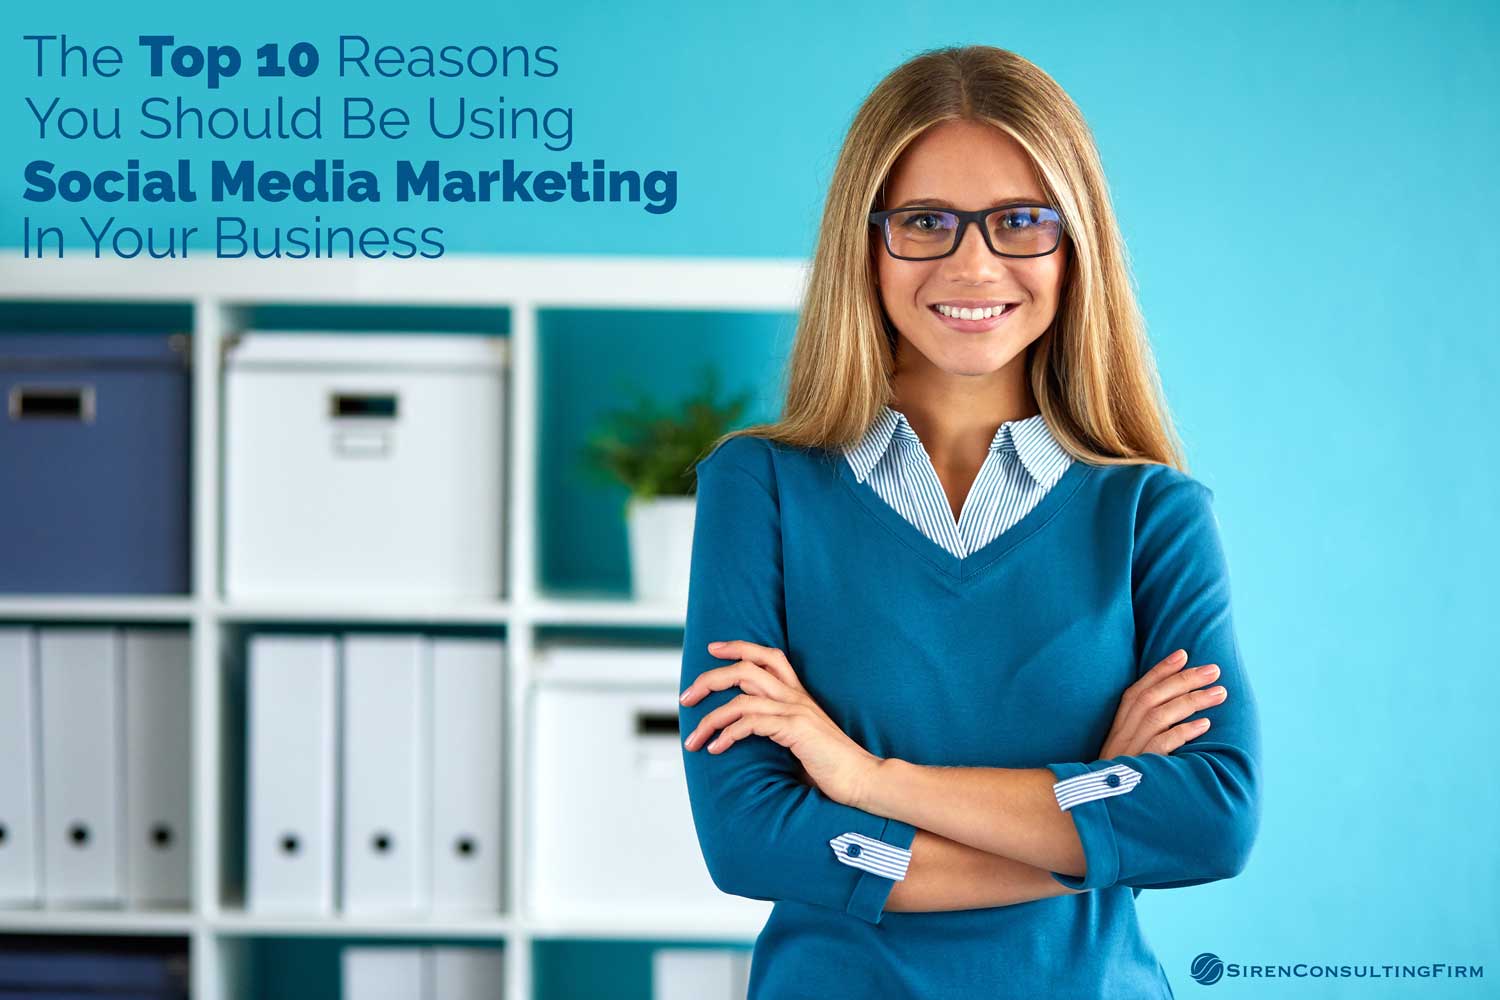 The Top 10 Reasons You Should Be Using Social Media Marketing In Your Business